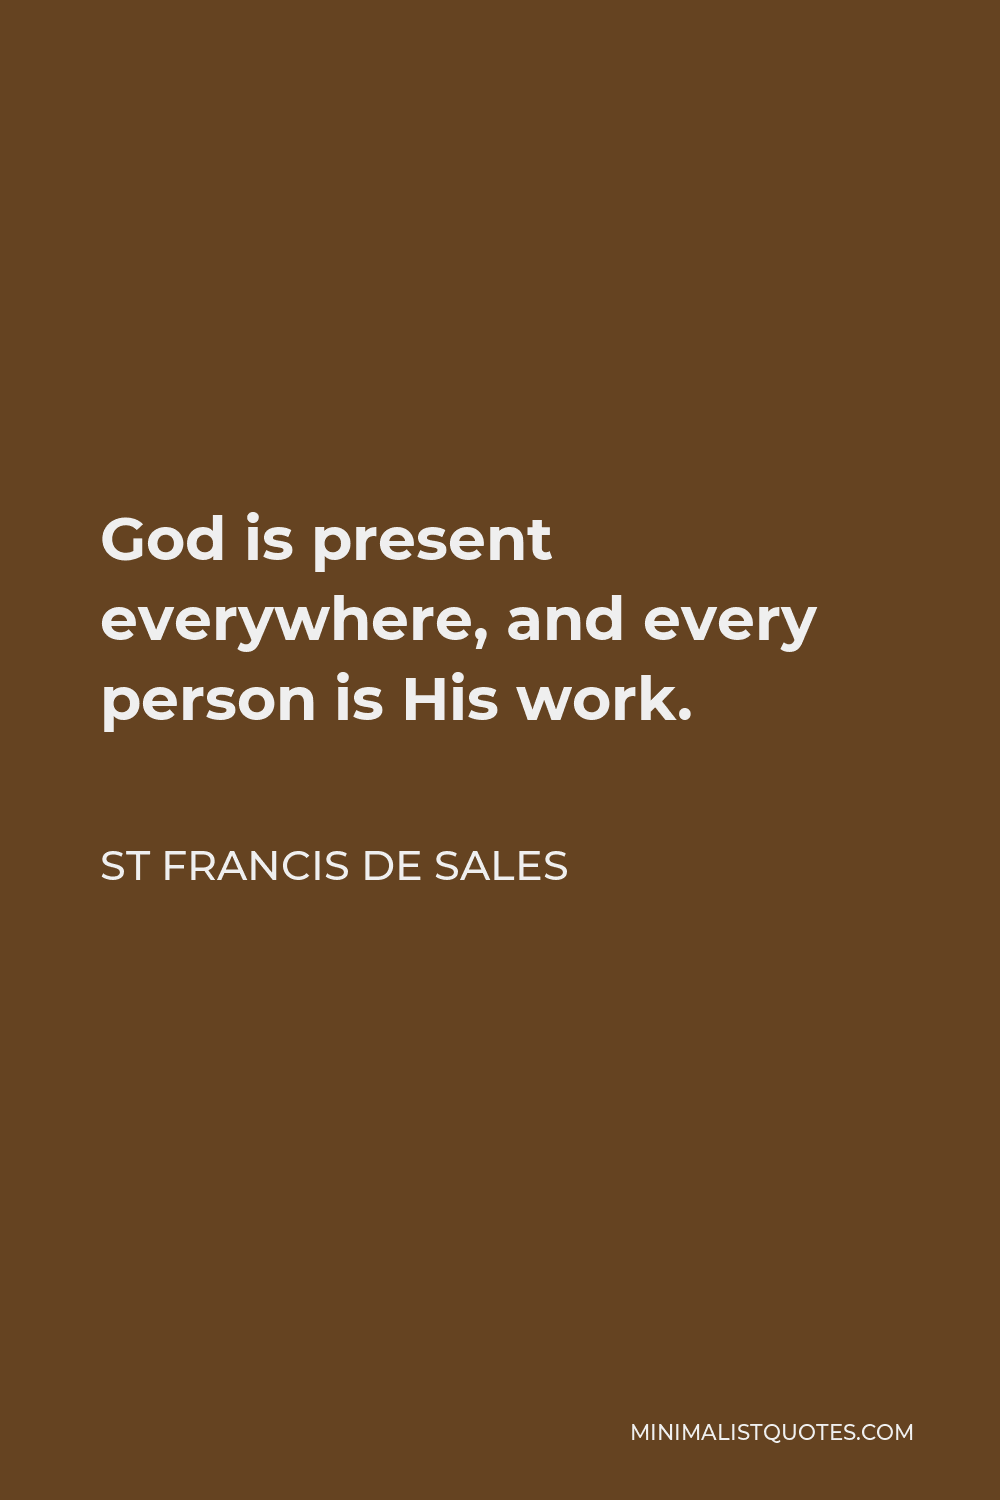 St Francis De Sales Quote - God is present everywhere, and every person is His work.